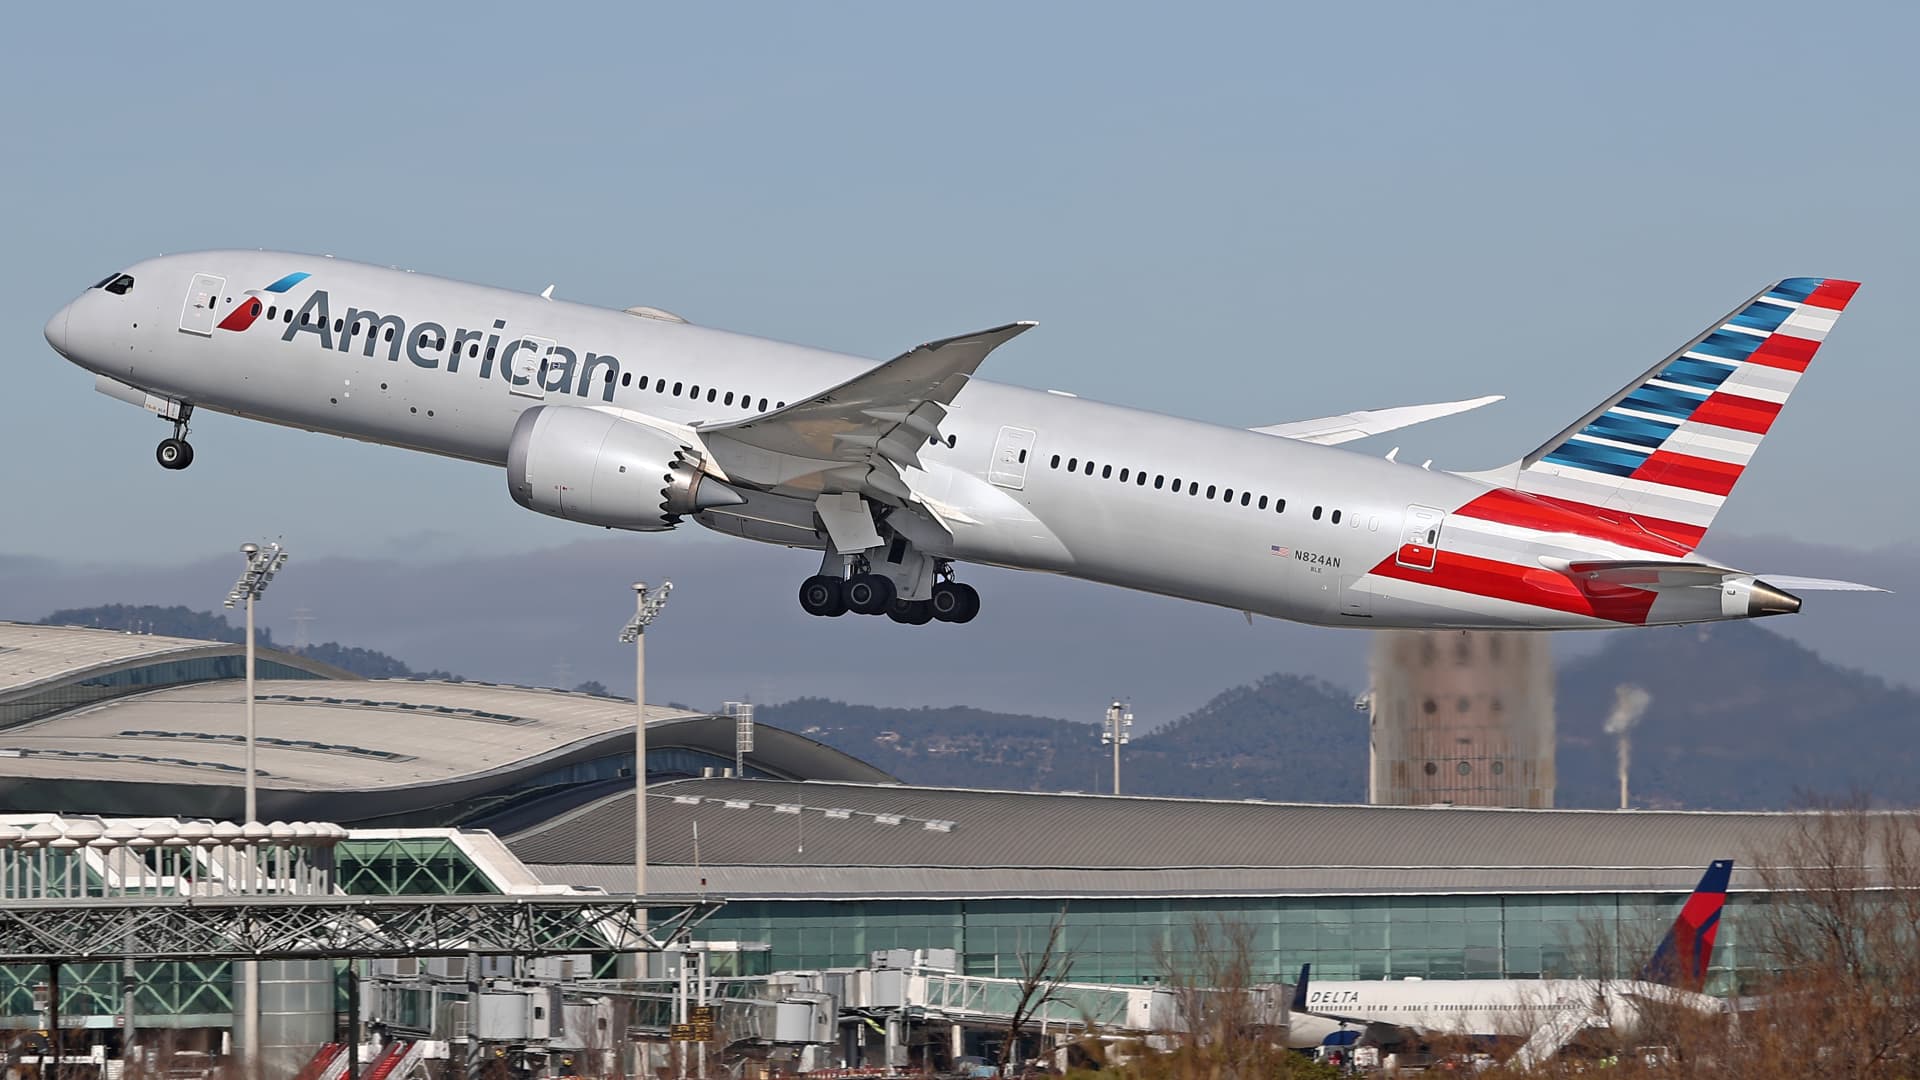 American Airlines cuts some international flights citing Boeing delays [Video]